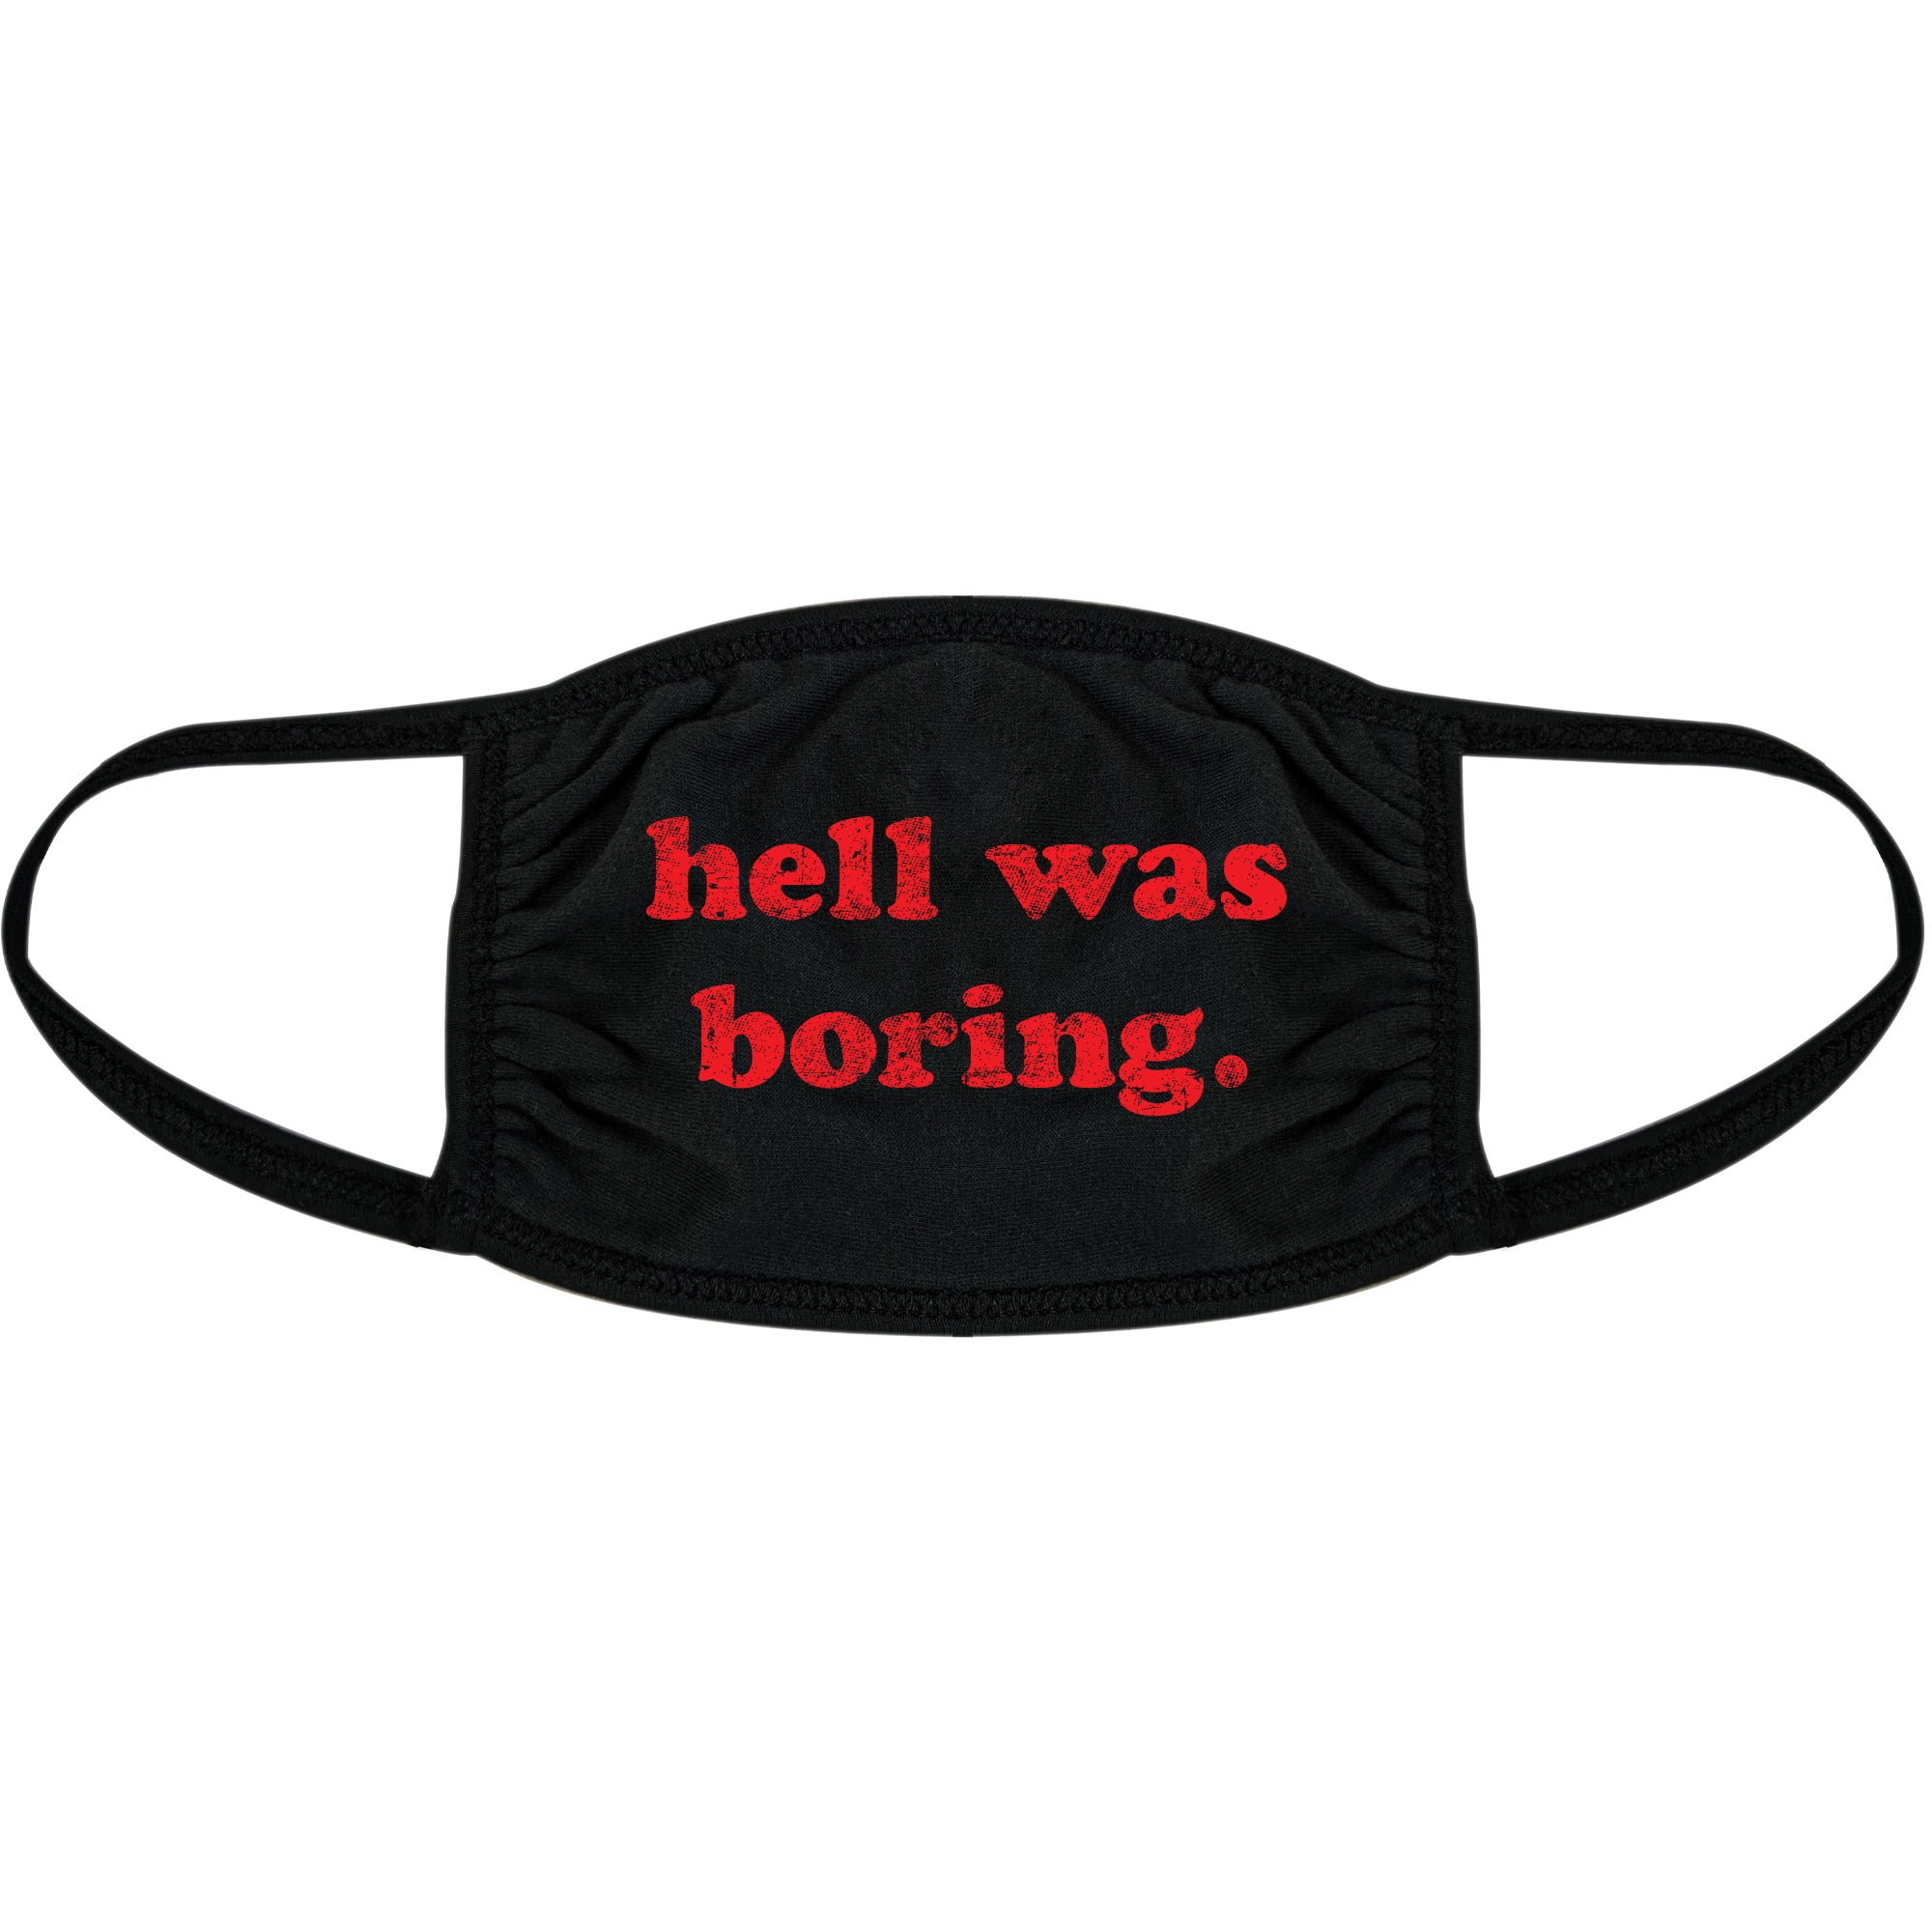 Funny Black Hell Was Boring Face Mask Nerdy Halloween Tee